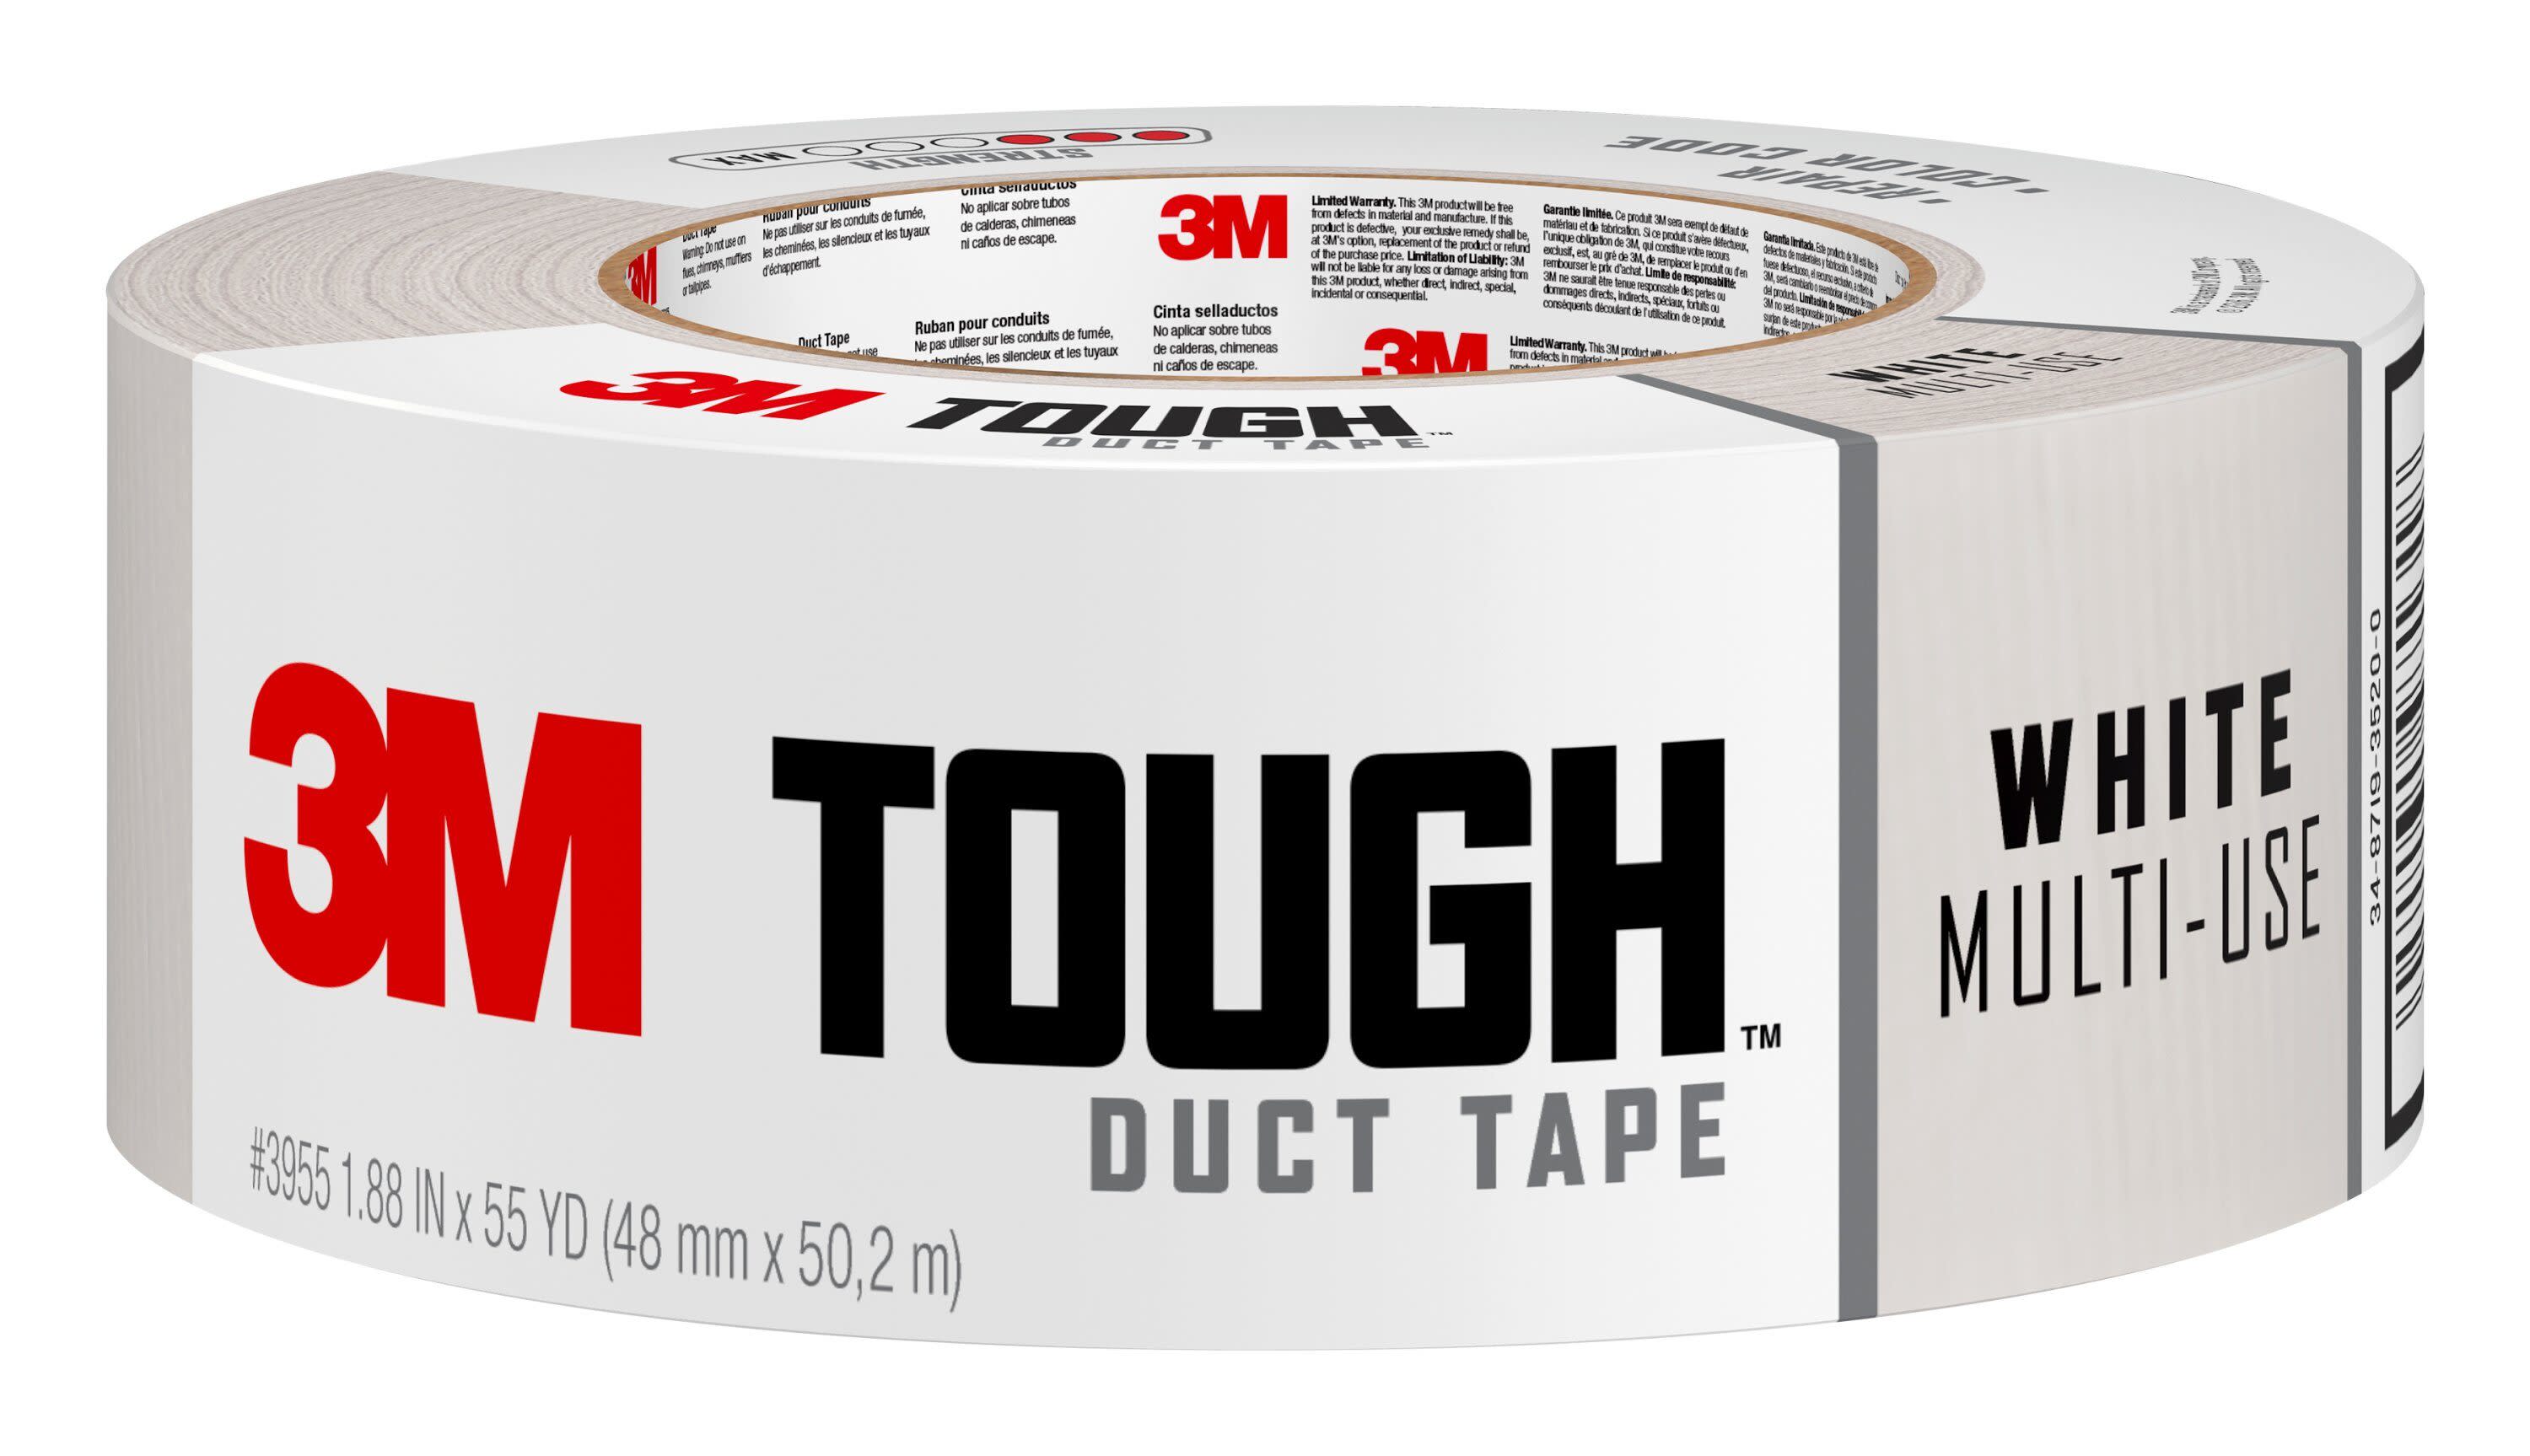 6 ROLLS Scotch WHITE Colored Duct Tape by 3M Scotch 1.5" x 5 YD WHITE 